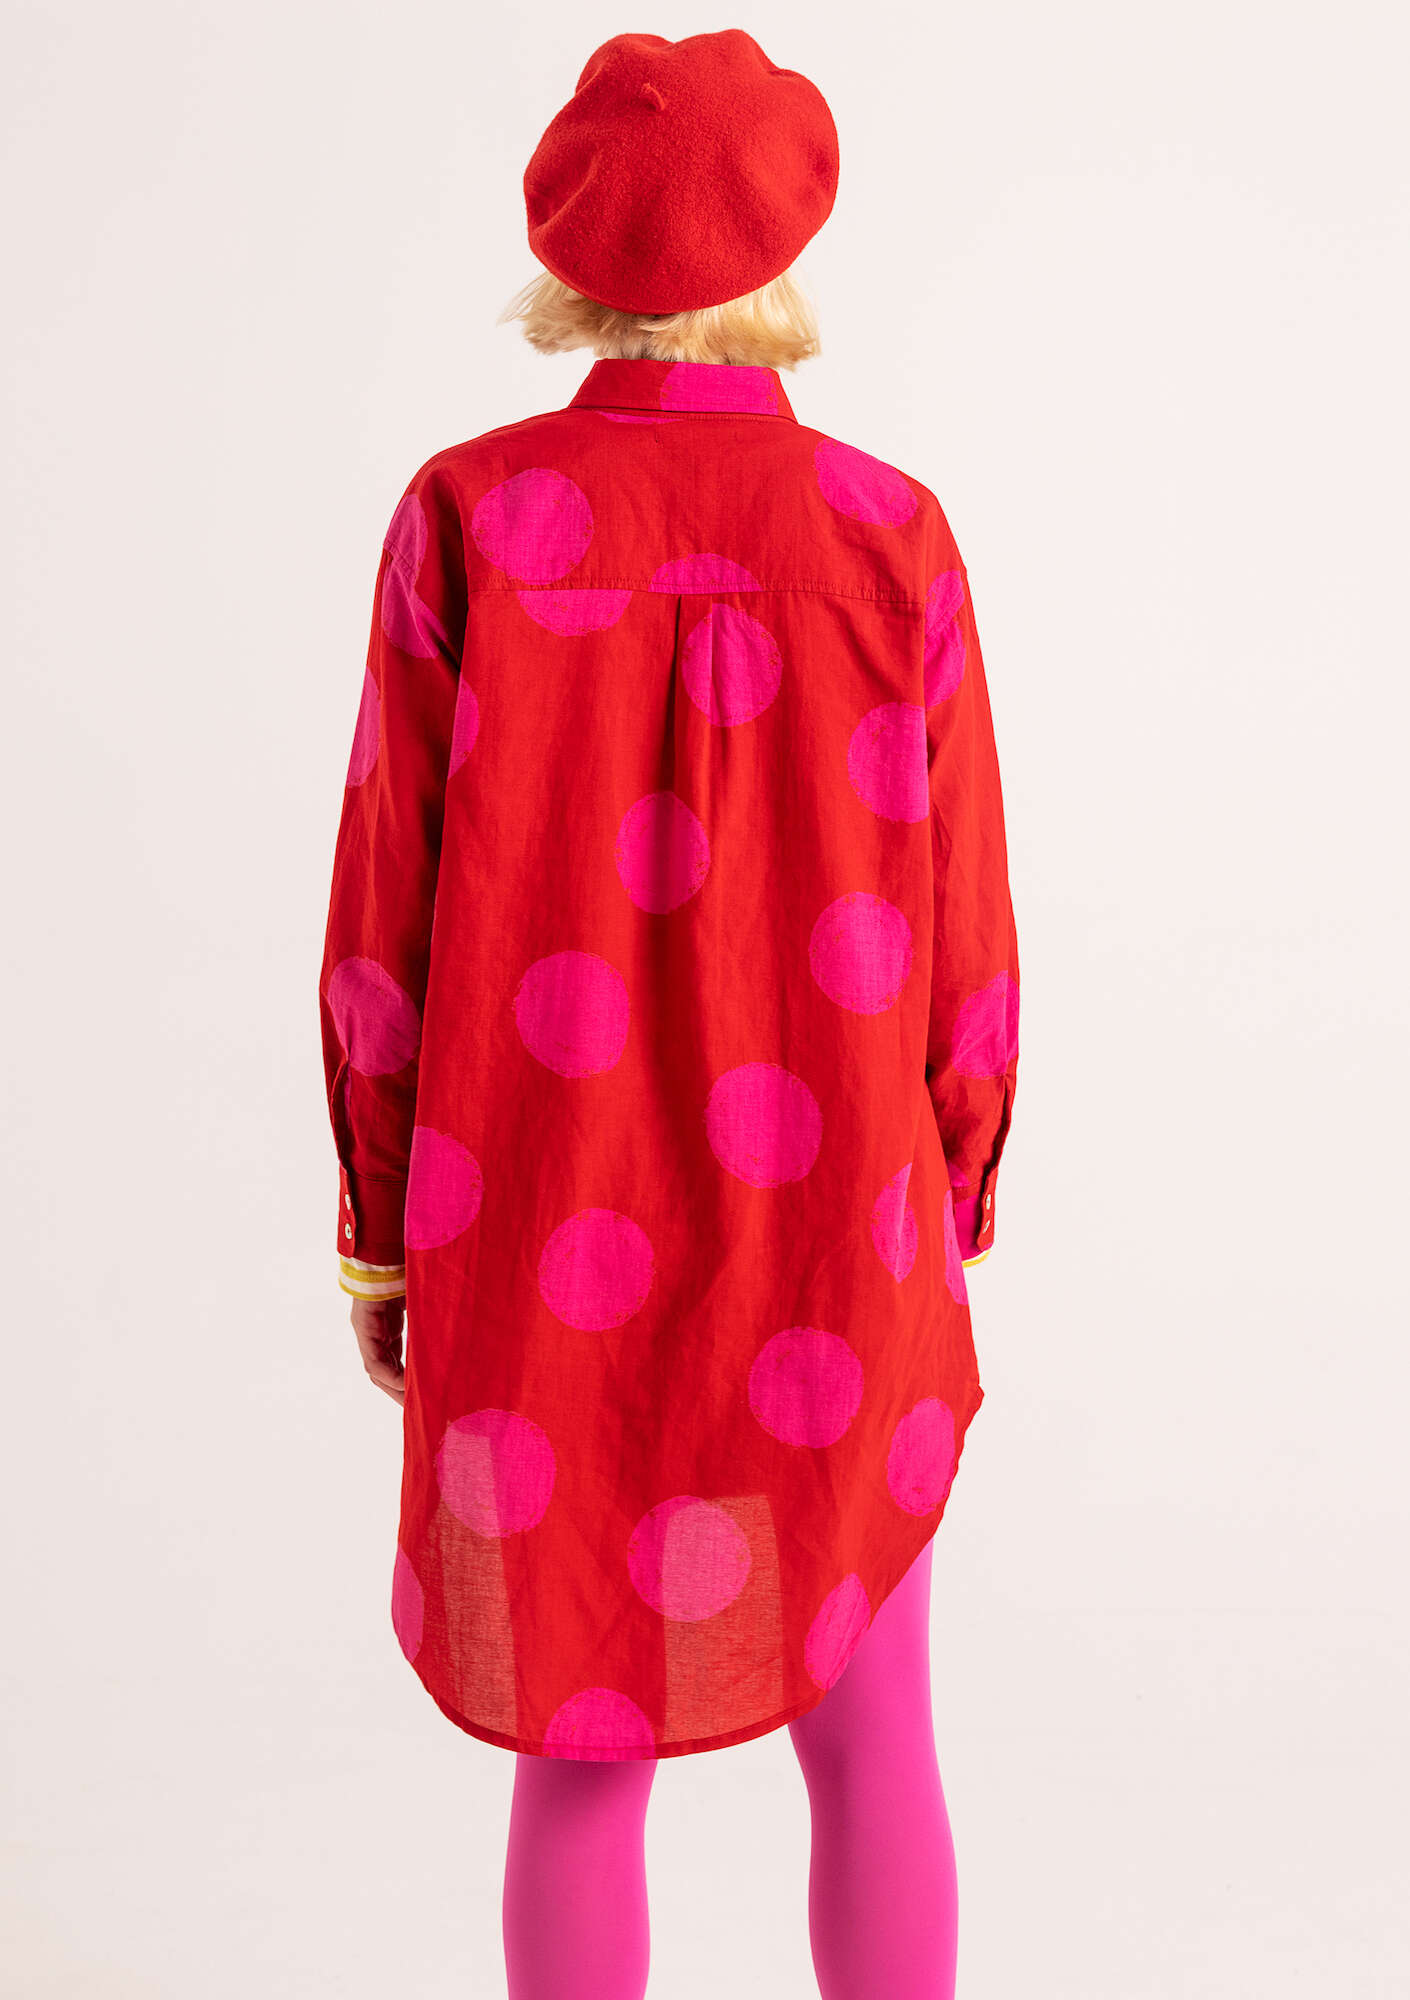 “Palette” shirt dress in organic cotton parrot red/patterned